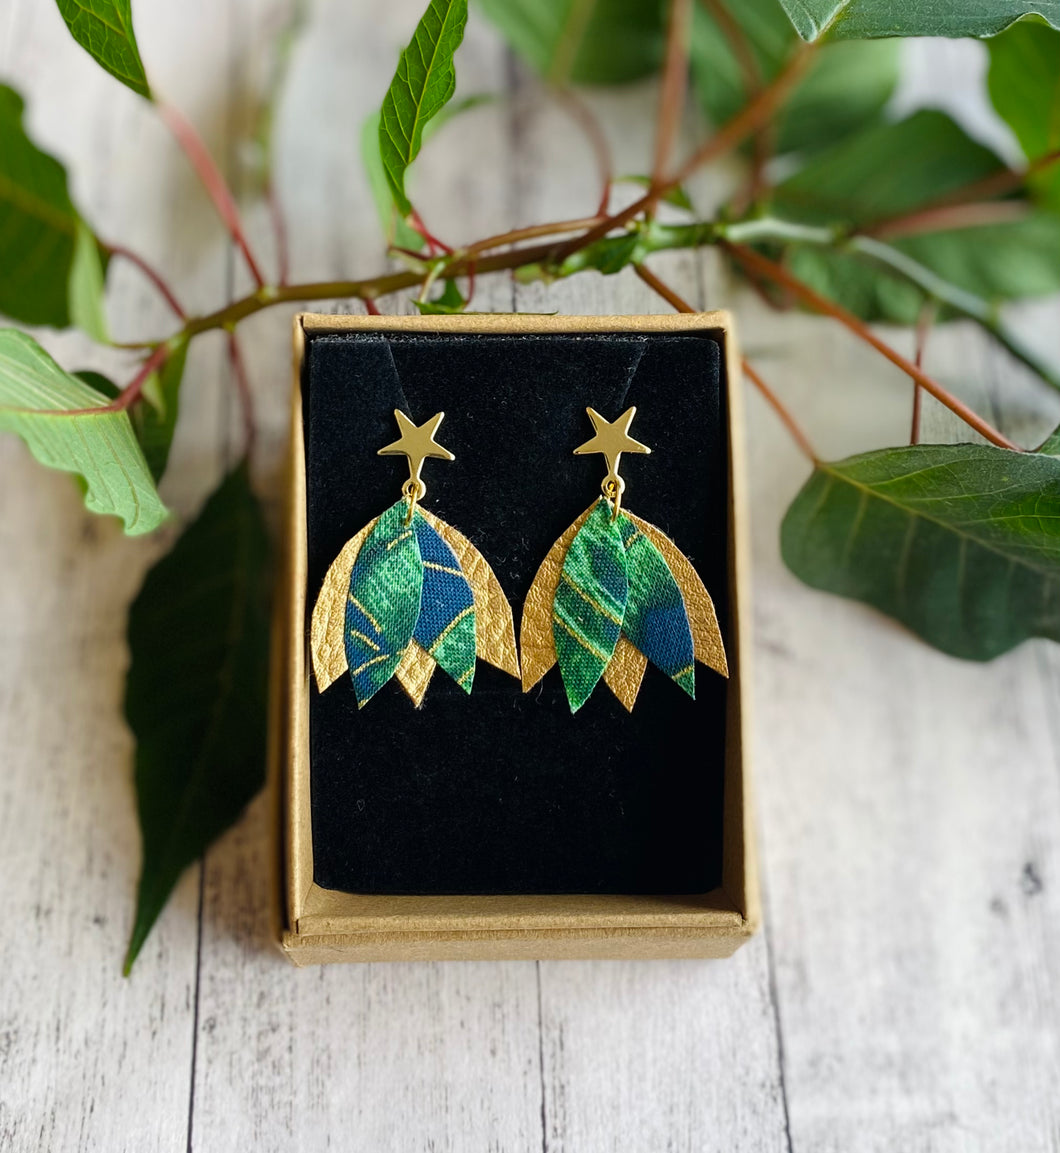 GG Designs fabric earrings bgreen peacock print gold leatherette gold star stud findings make from recycled materials recycled handbags irish sustainable jewellery Irish jewellery designs